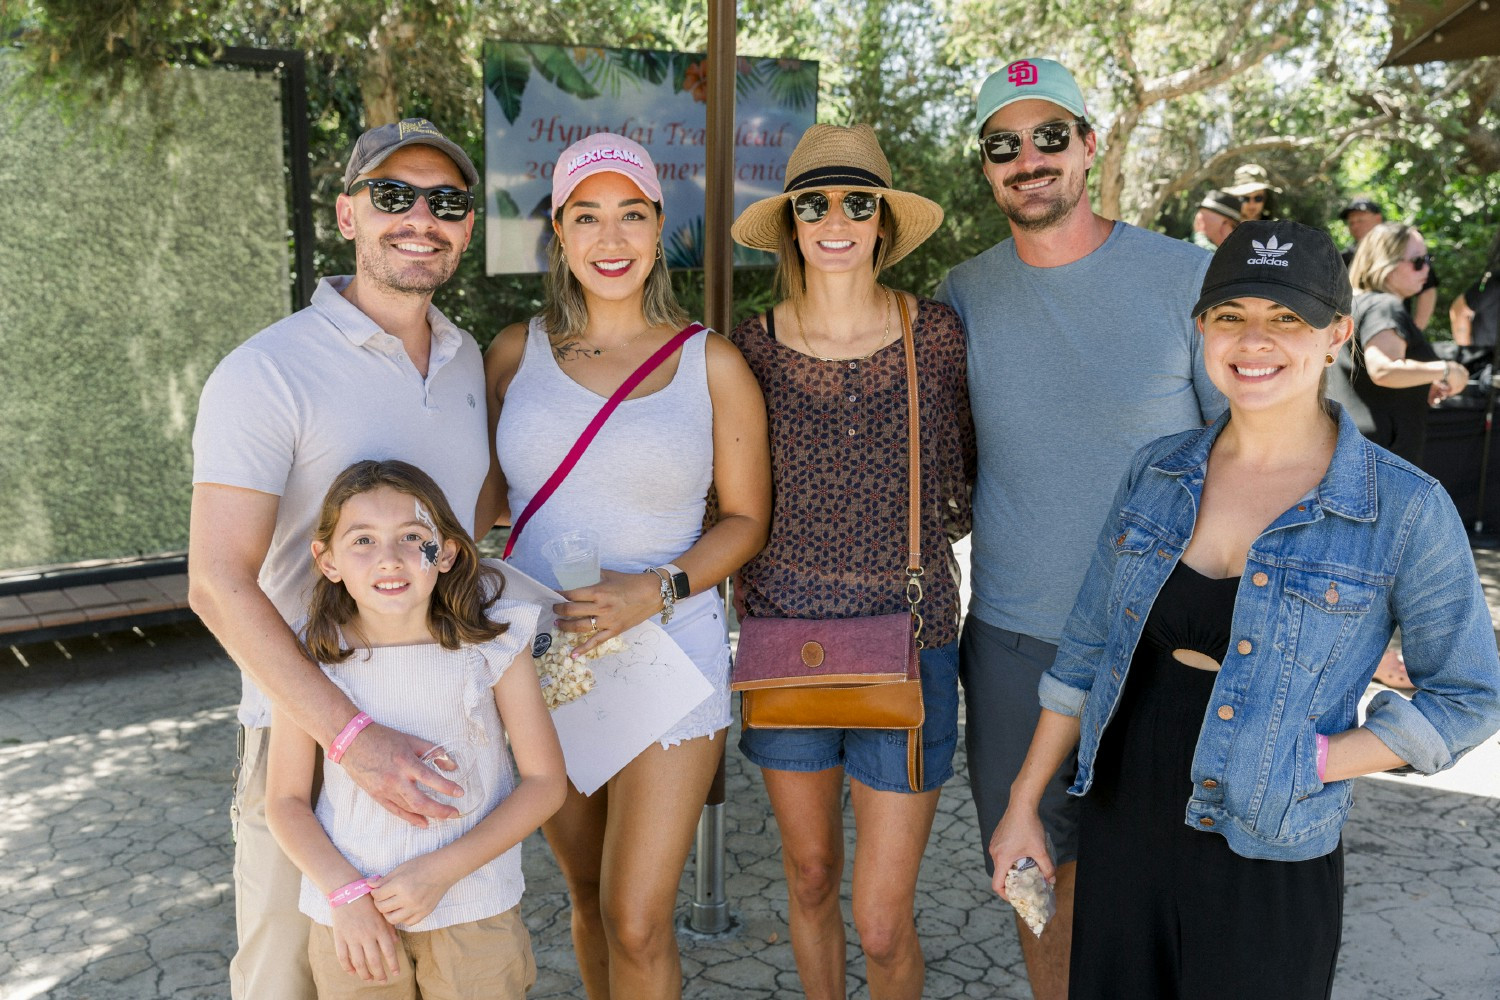 TEAM MEMBERS AND THEIR FAMILIES ON OUR SUMMER PICNIC EVENT ENJOYING A WONDERFUL DAY AT THE SAN DIEGO ZOO.